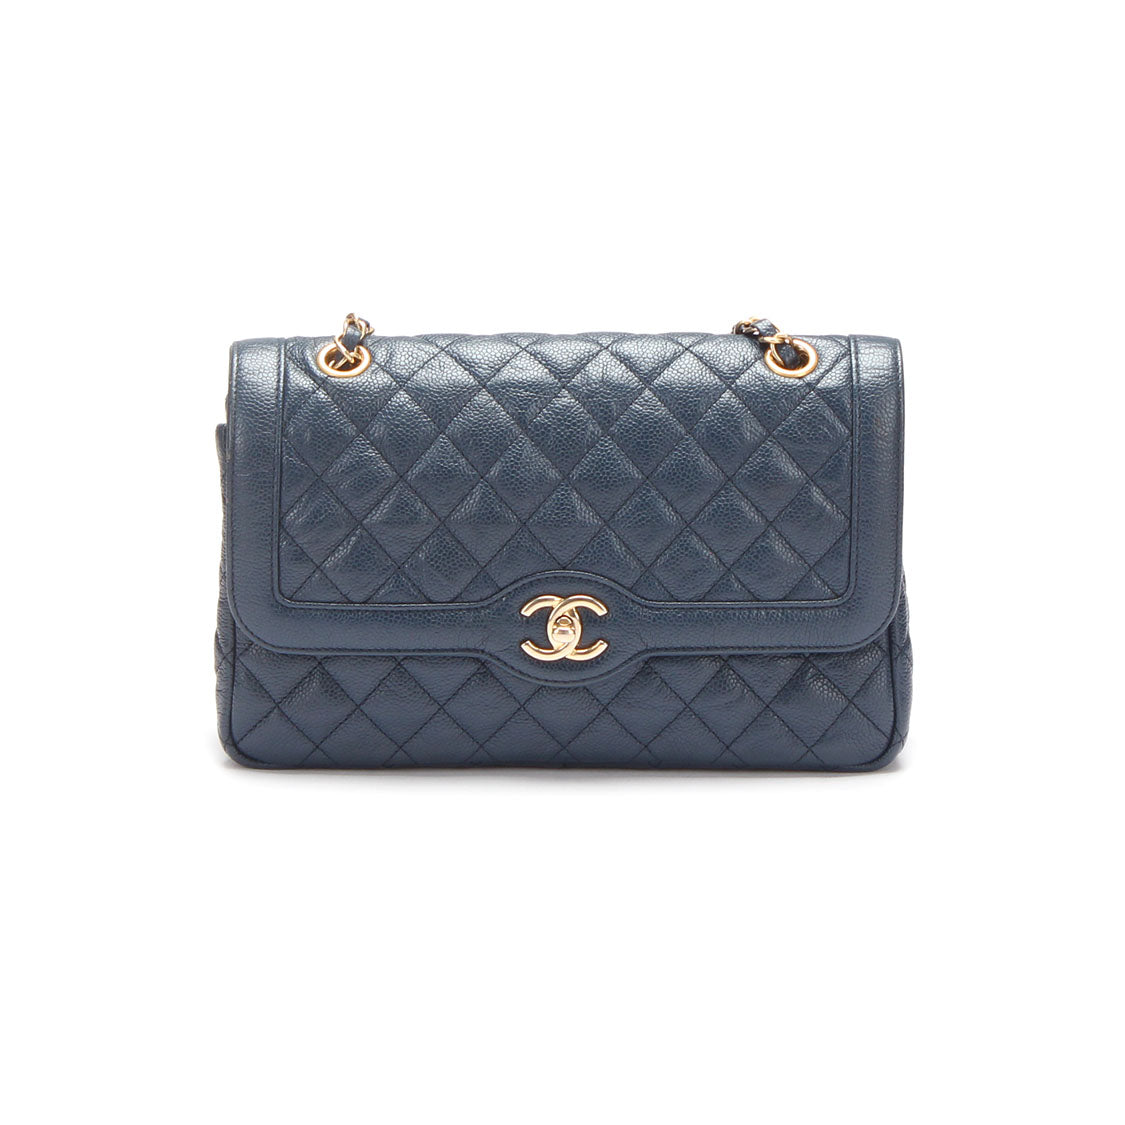 CC Quilted Caviar Flap Bag